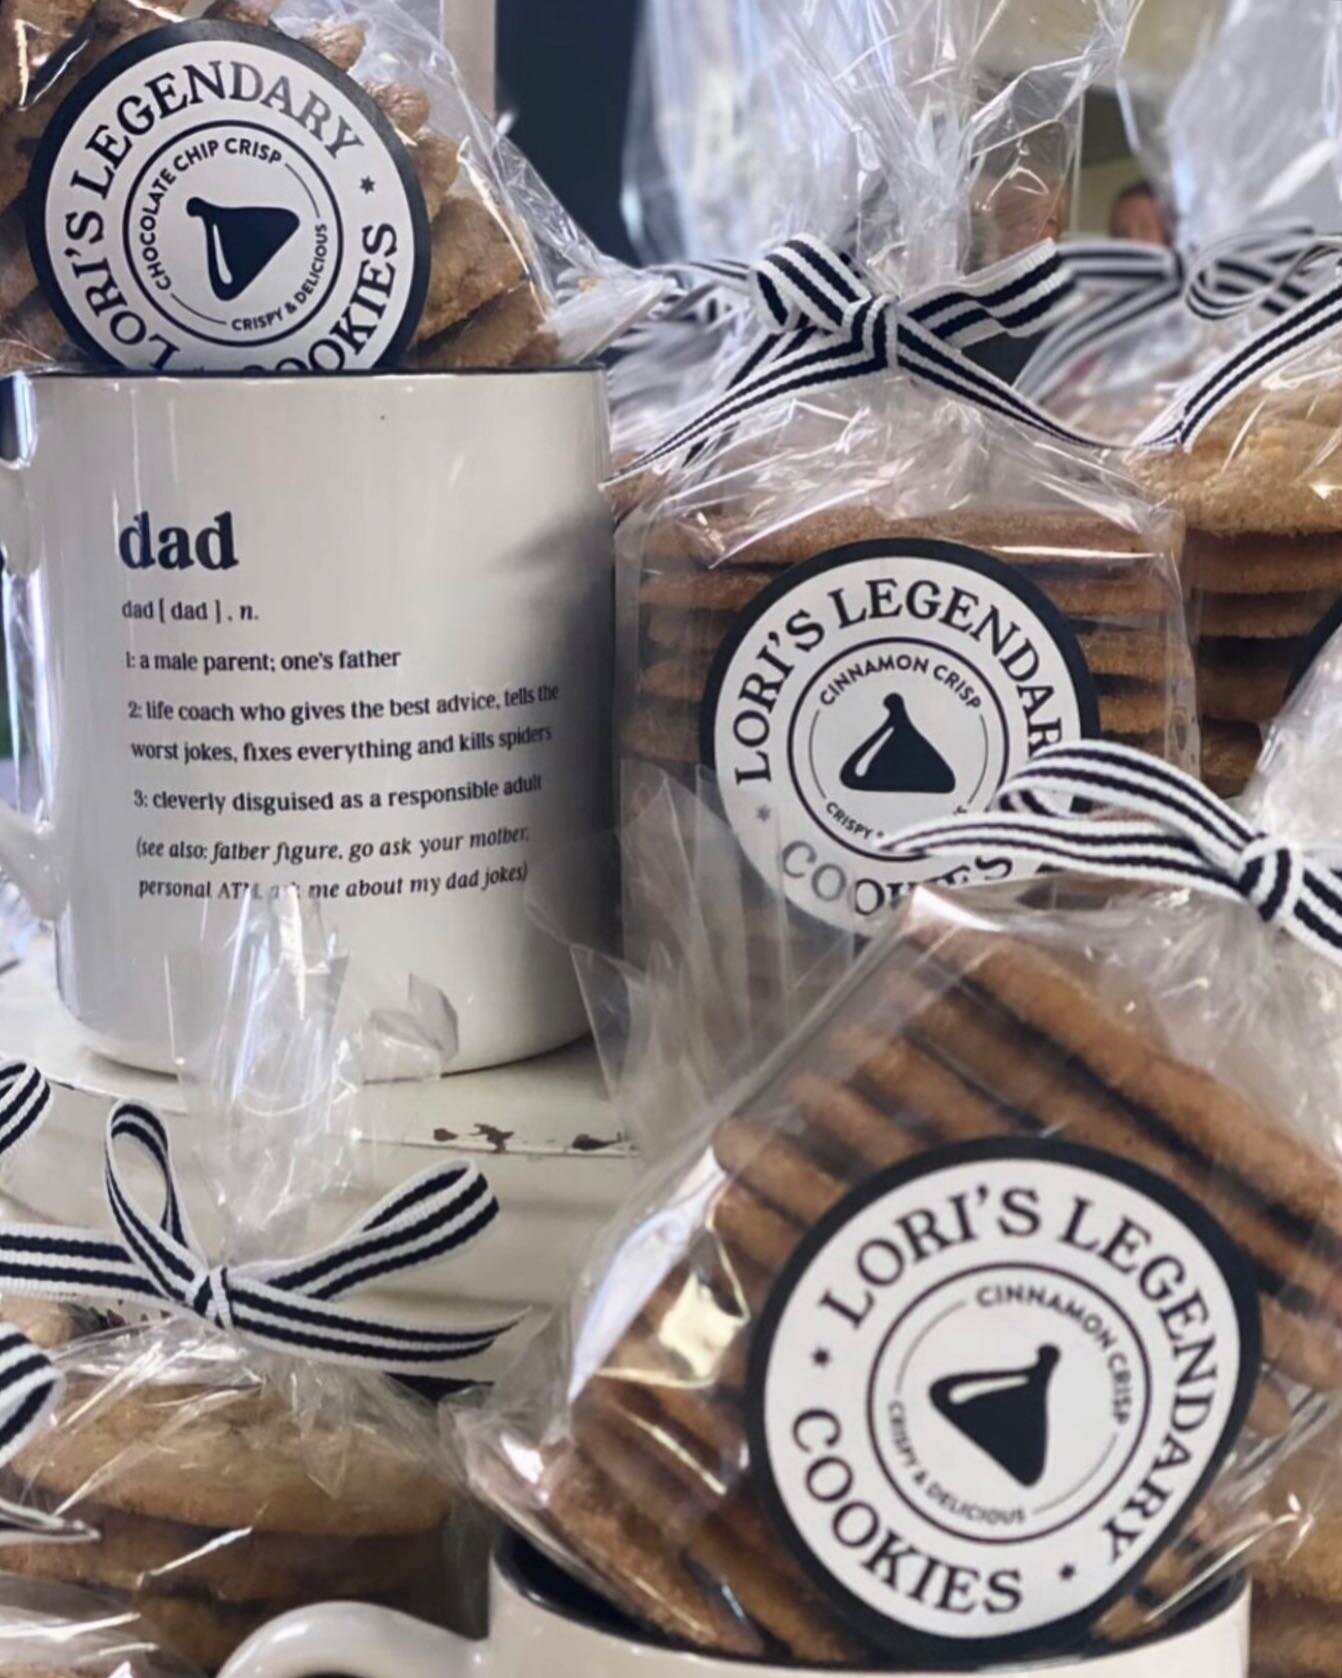 Did you know our cookies are available at @wishwalnutcreek this week? They make the perfect gift for Father&rsquo;s Day (or any day)! Don&rsquo;t forget to treat the special dad in your life and check out all the fun gifts at Wish! 🍪